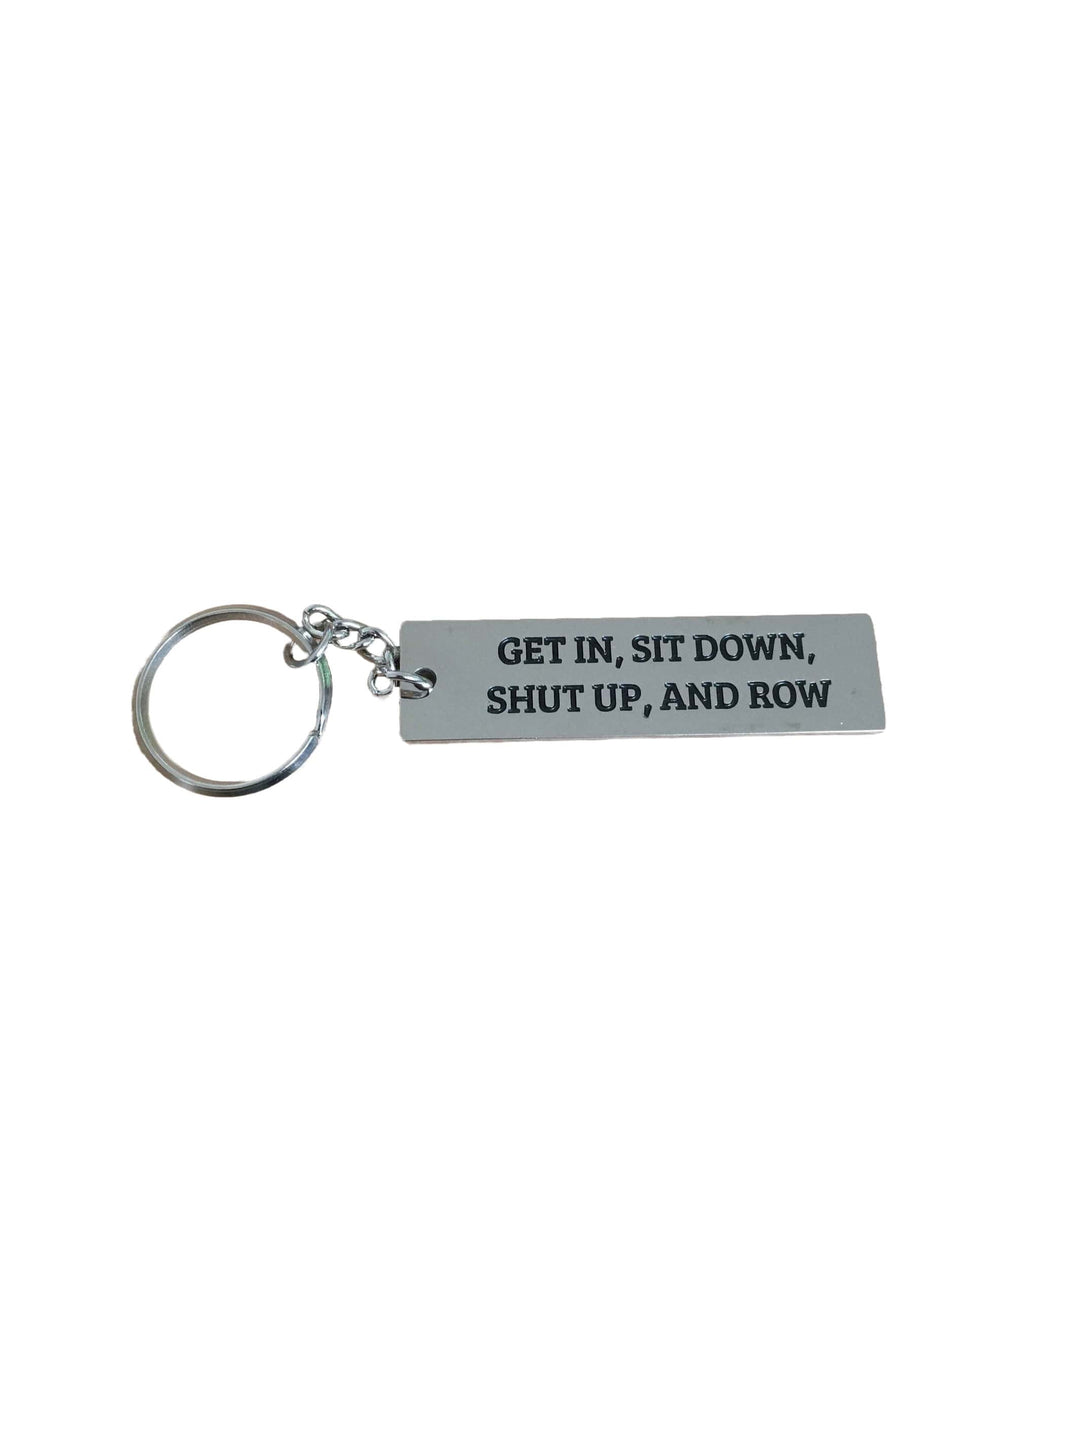 Get In, Sit Down, Shut Up, and Row Key Chain